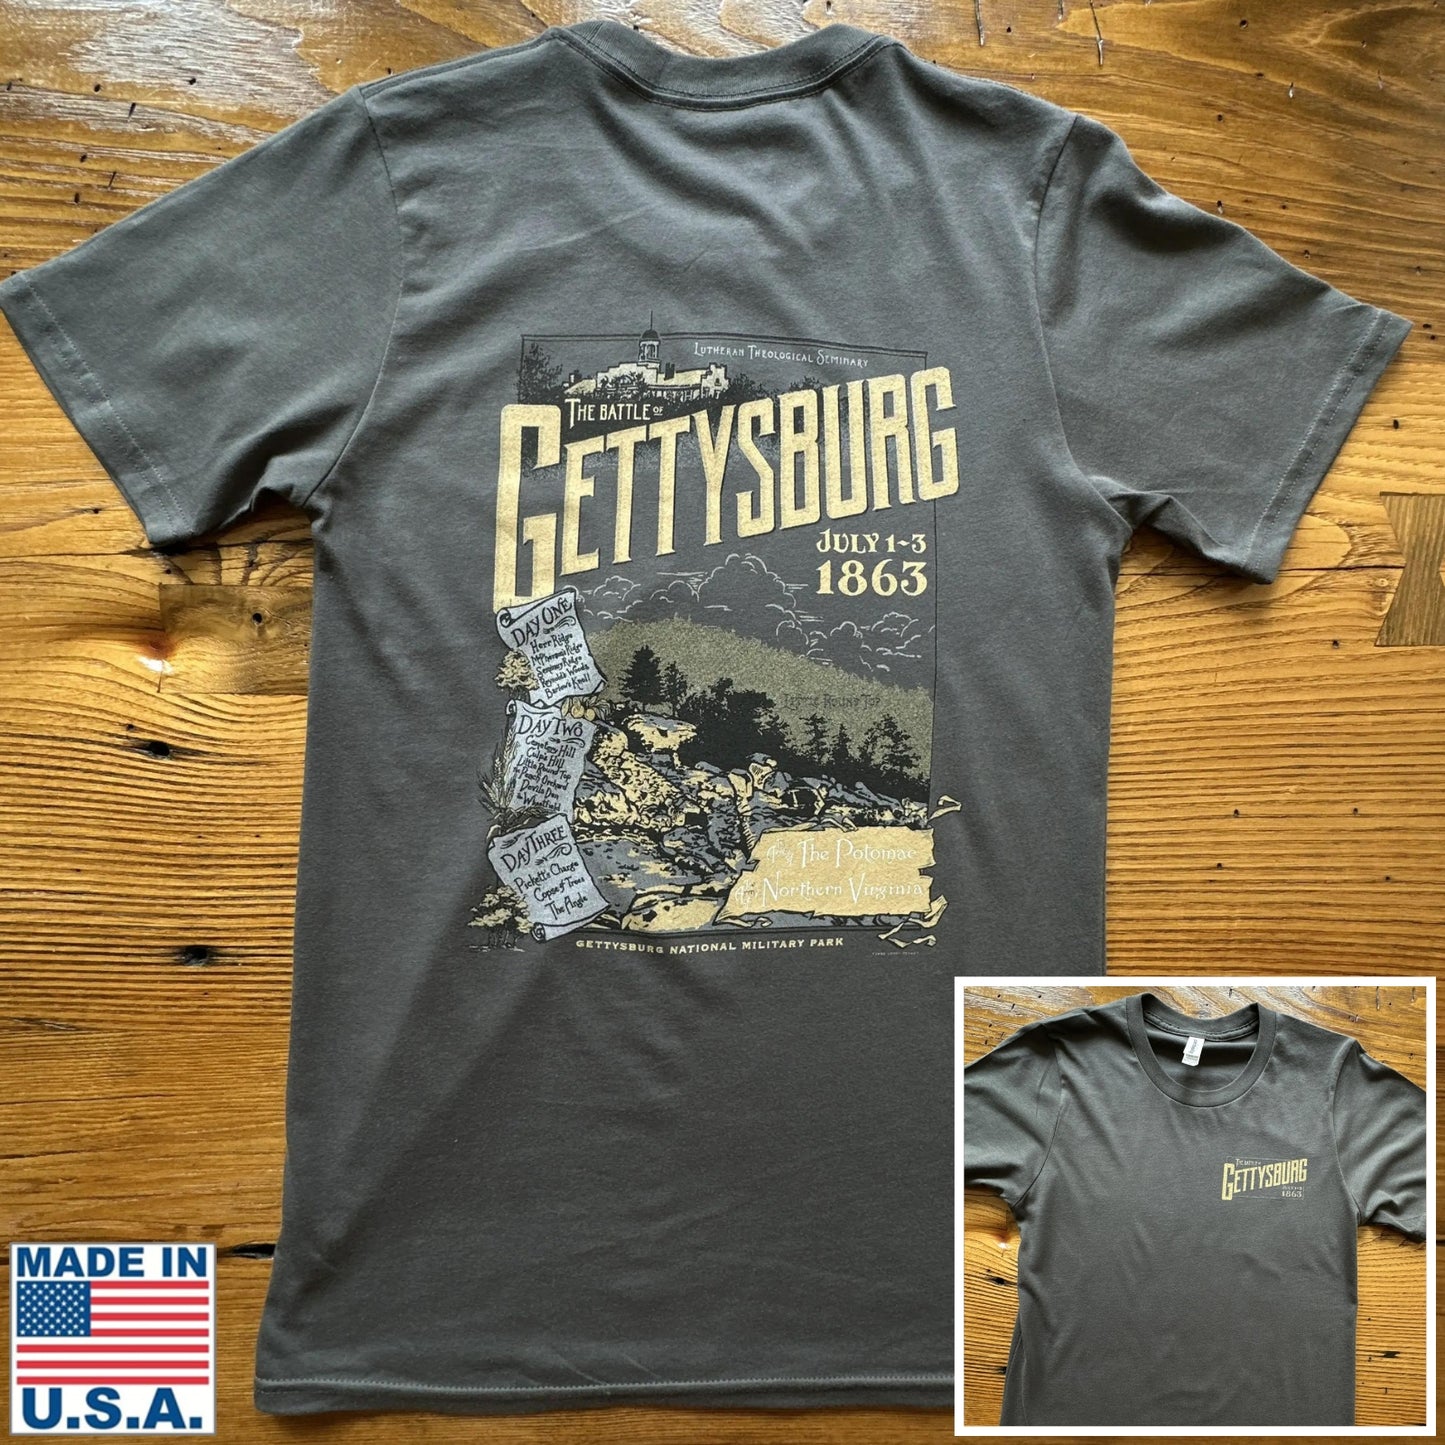 Grey "The Battle of Gettysburg" Shirt from The History List store